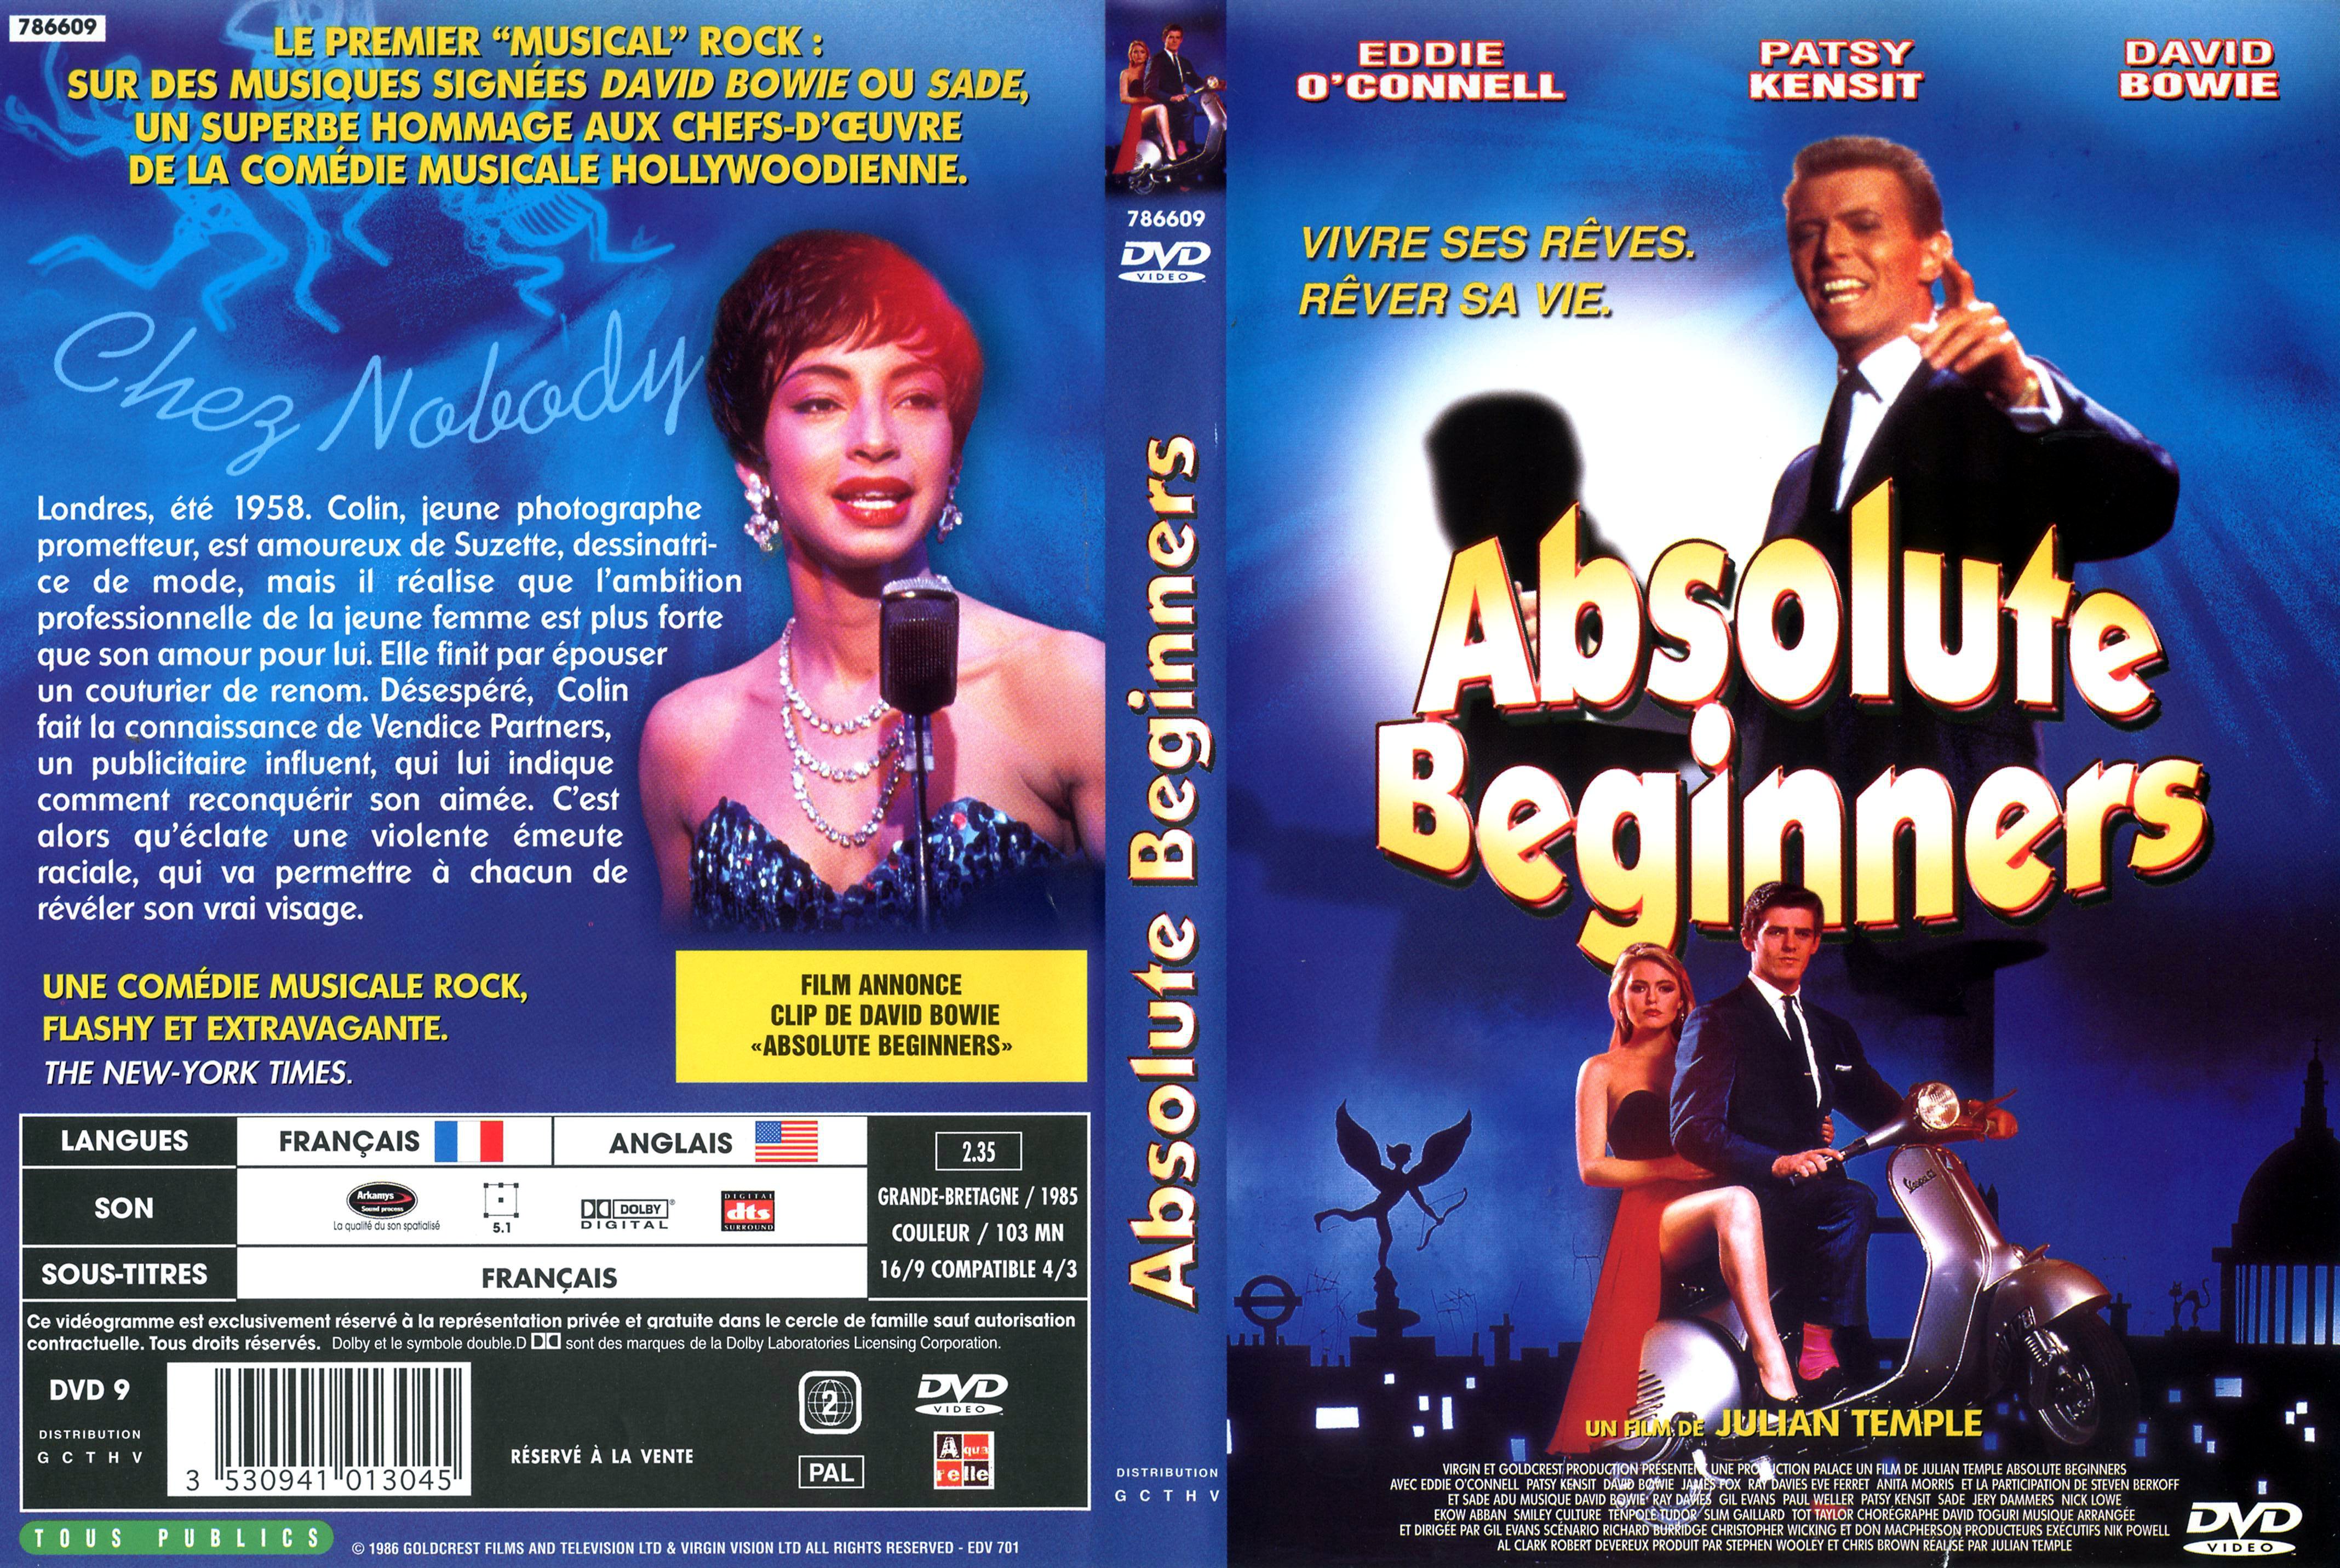 Jaquette DVD Absolute beginners v2